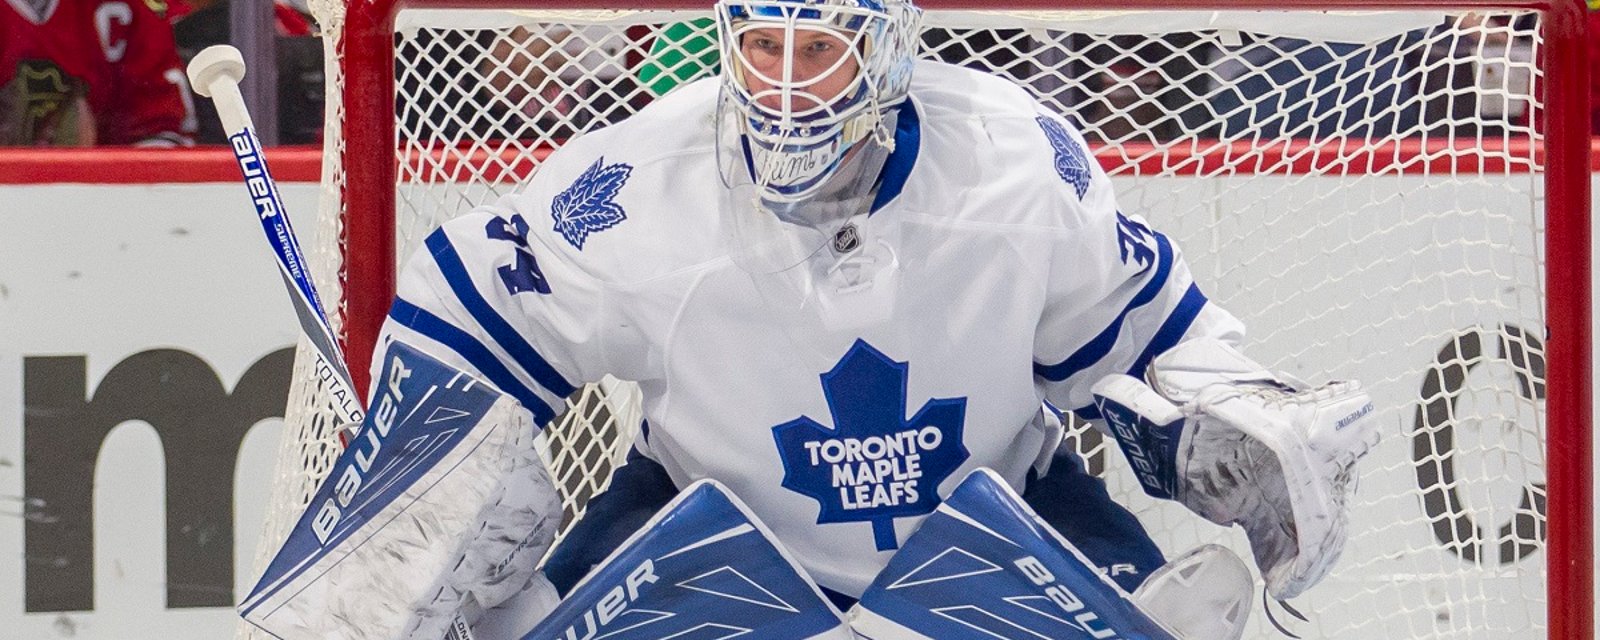 Breaking: Leafs will be up against a familiar face on Thursday night.